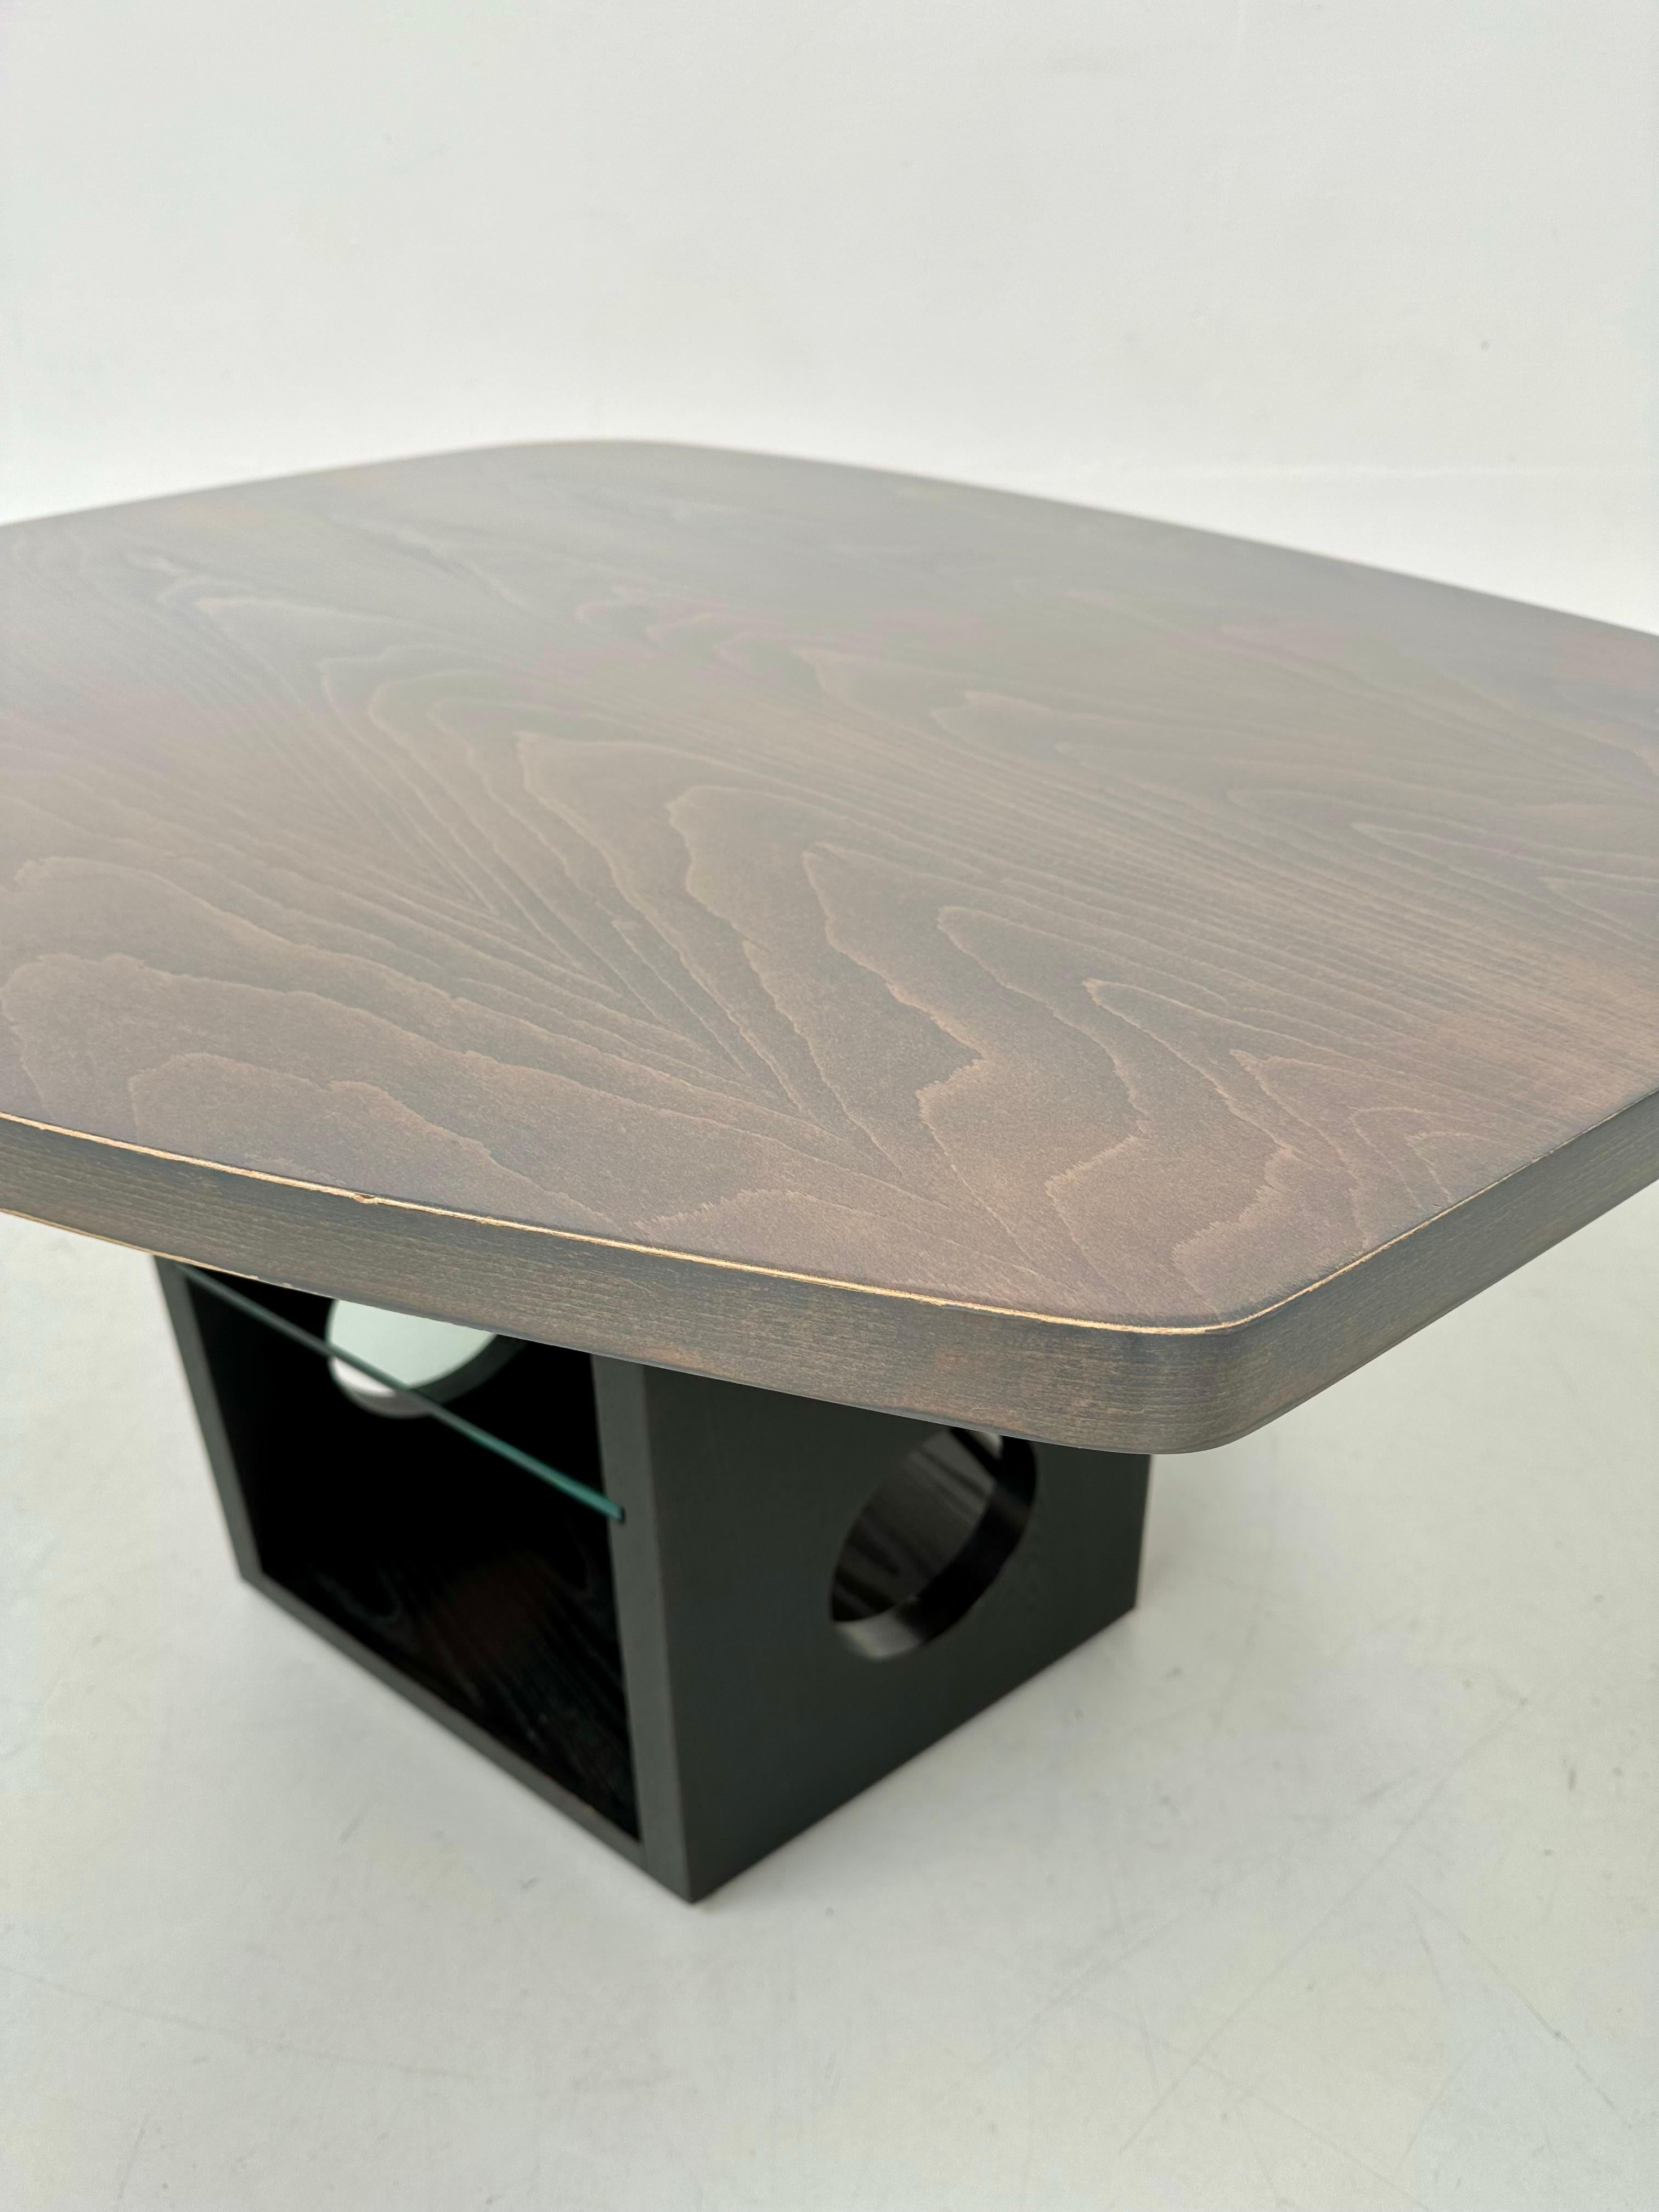 Glass Vintage French Tecta M21 Desk / Table in Black and Silver By Jean Prouvé, 1980s. For Sale